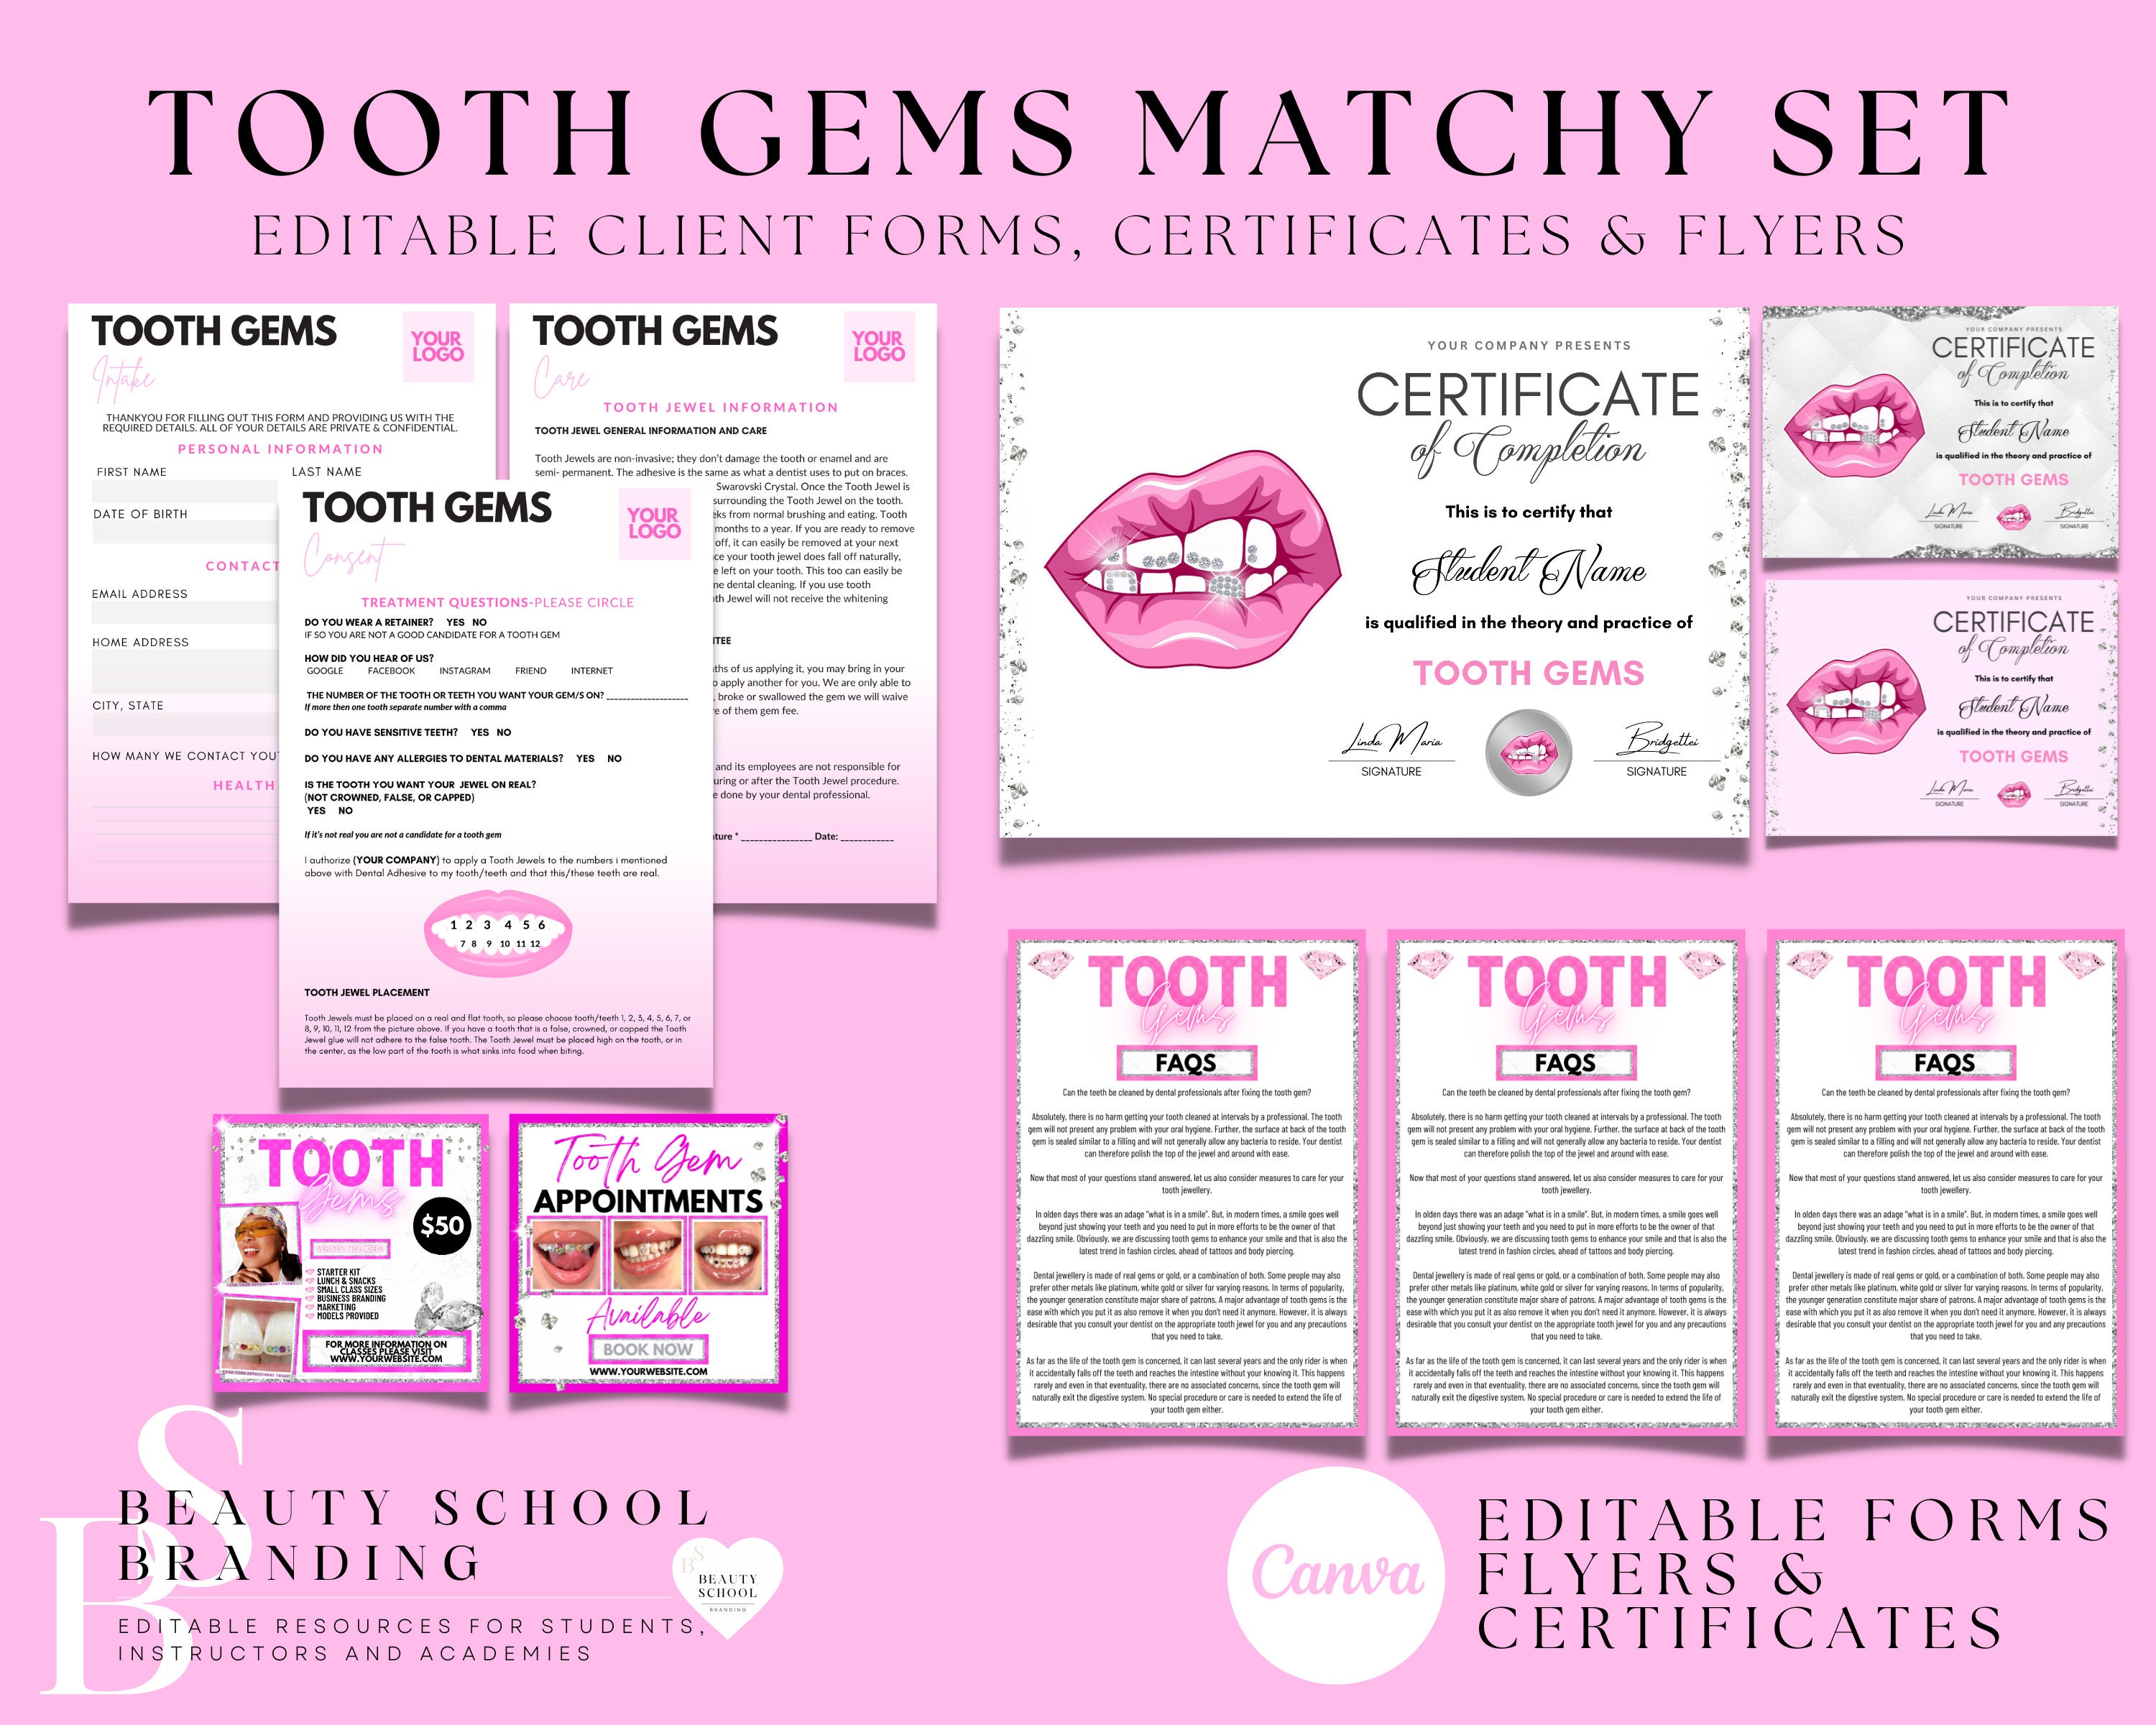 TOOTH GEMS, matching set, consent forms, intake, waiver, aftercare,  certificateS, Social Media, Training Flyers, FAQS, All editable in Canva